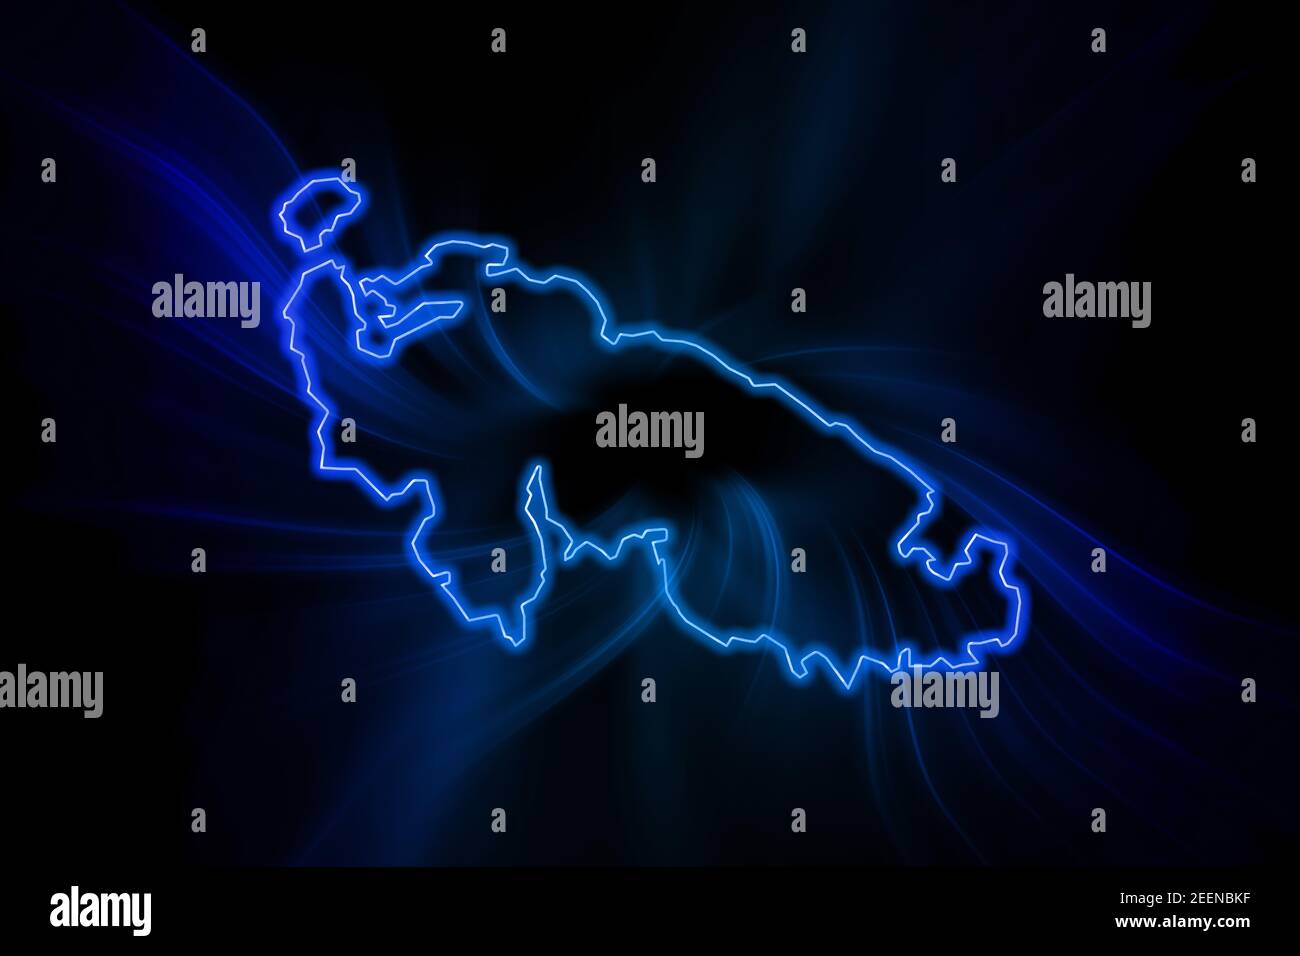 Glowing Map of Aland Islands, modern blue outline map, on dark Background Stock Photo